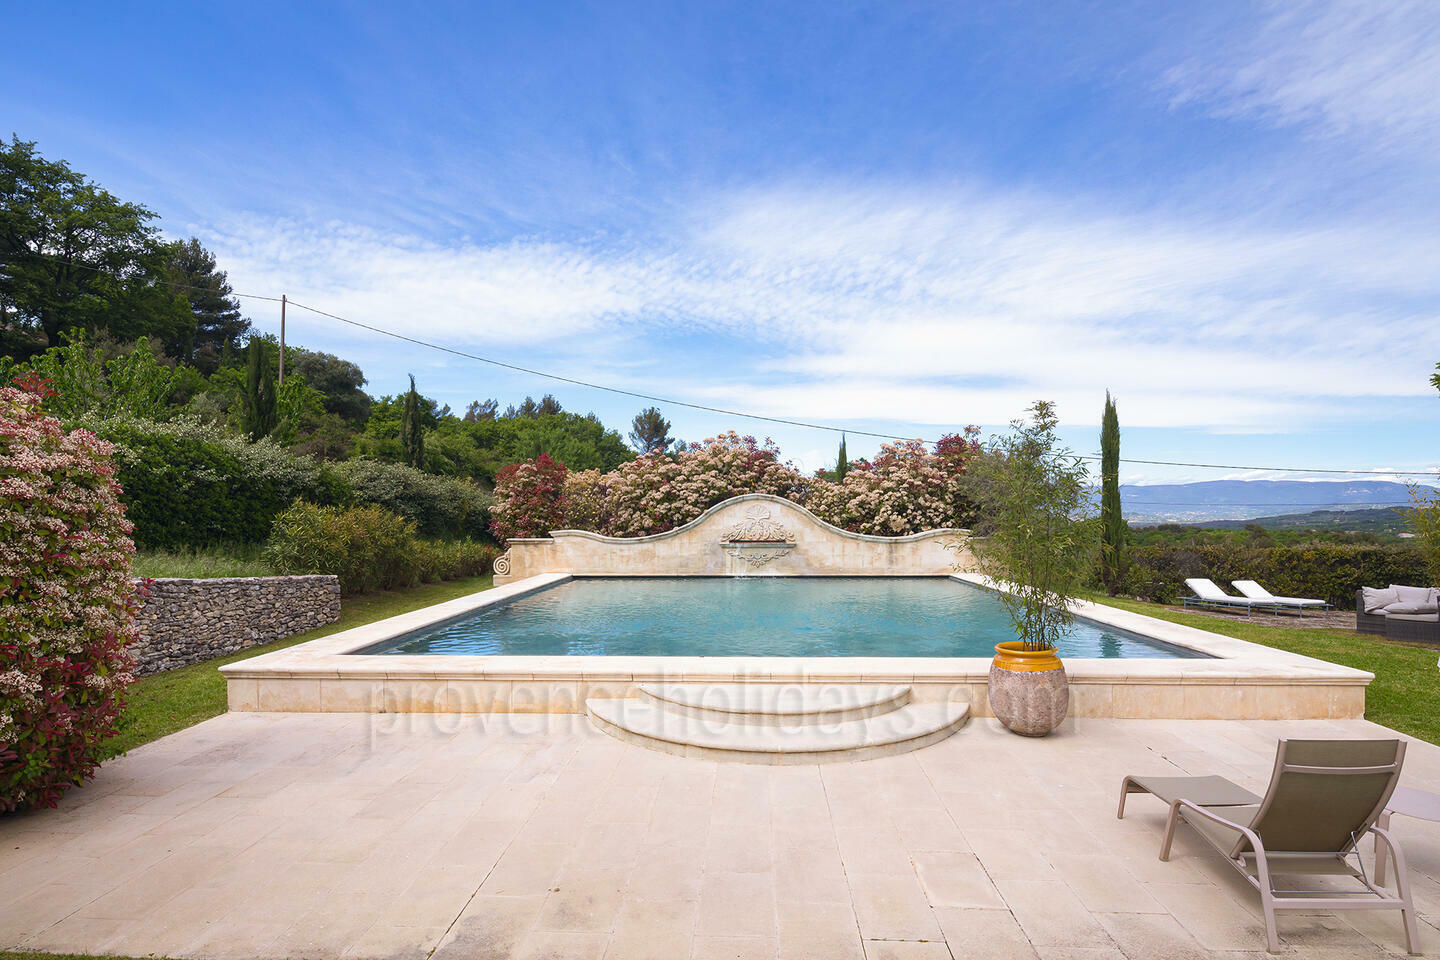 19 - Outstanding Property with Wonderful Views of the Luberon: Villa: Pool